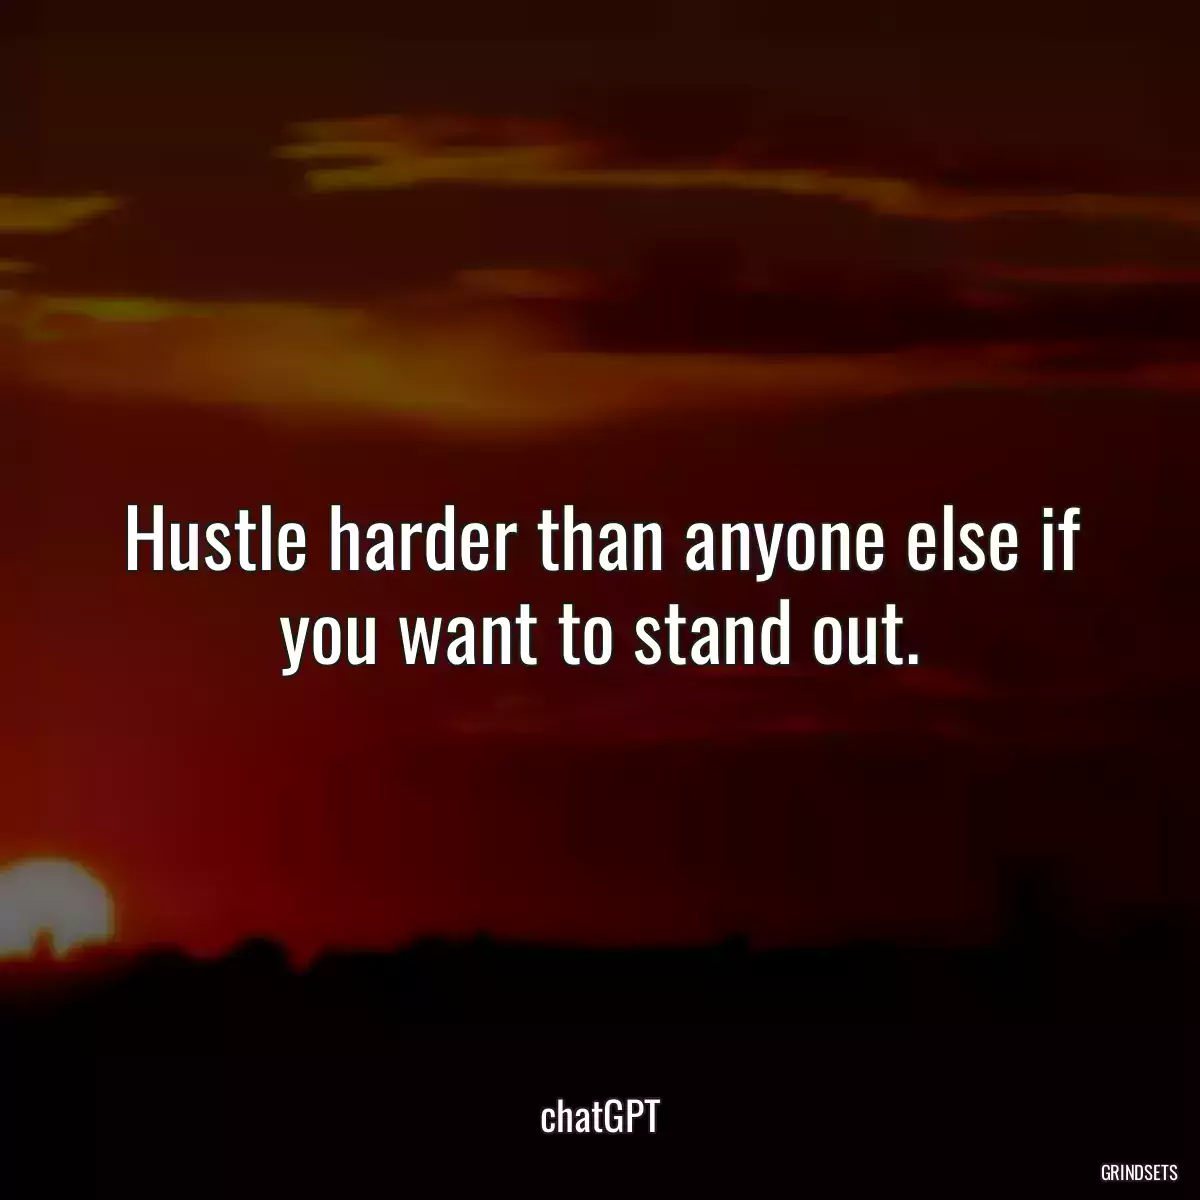 Hustle harder than anyone else if you want to stand out.